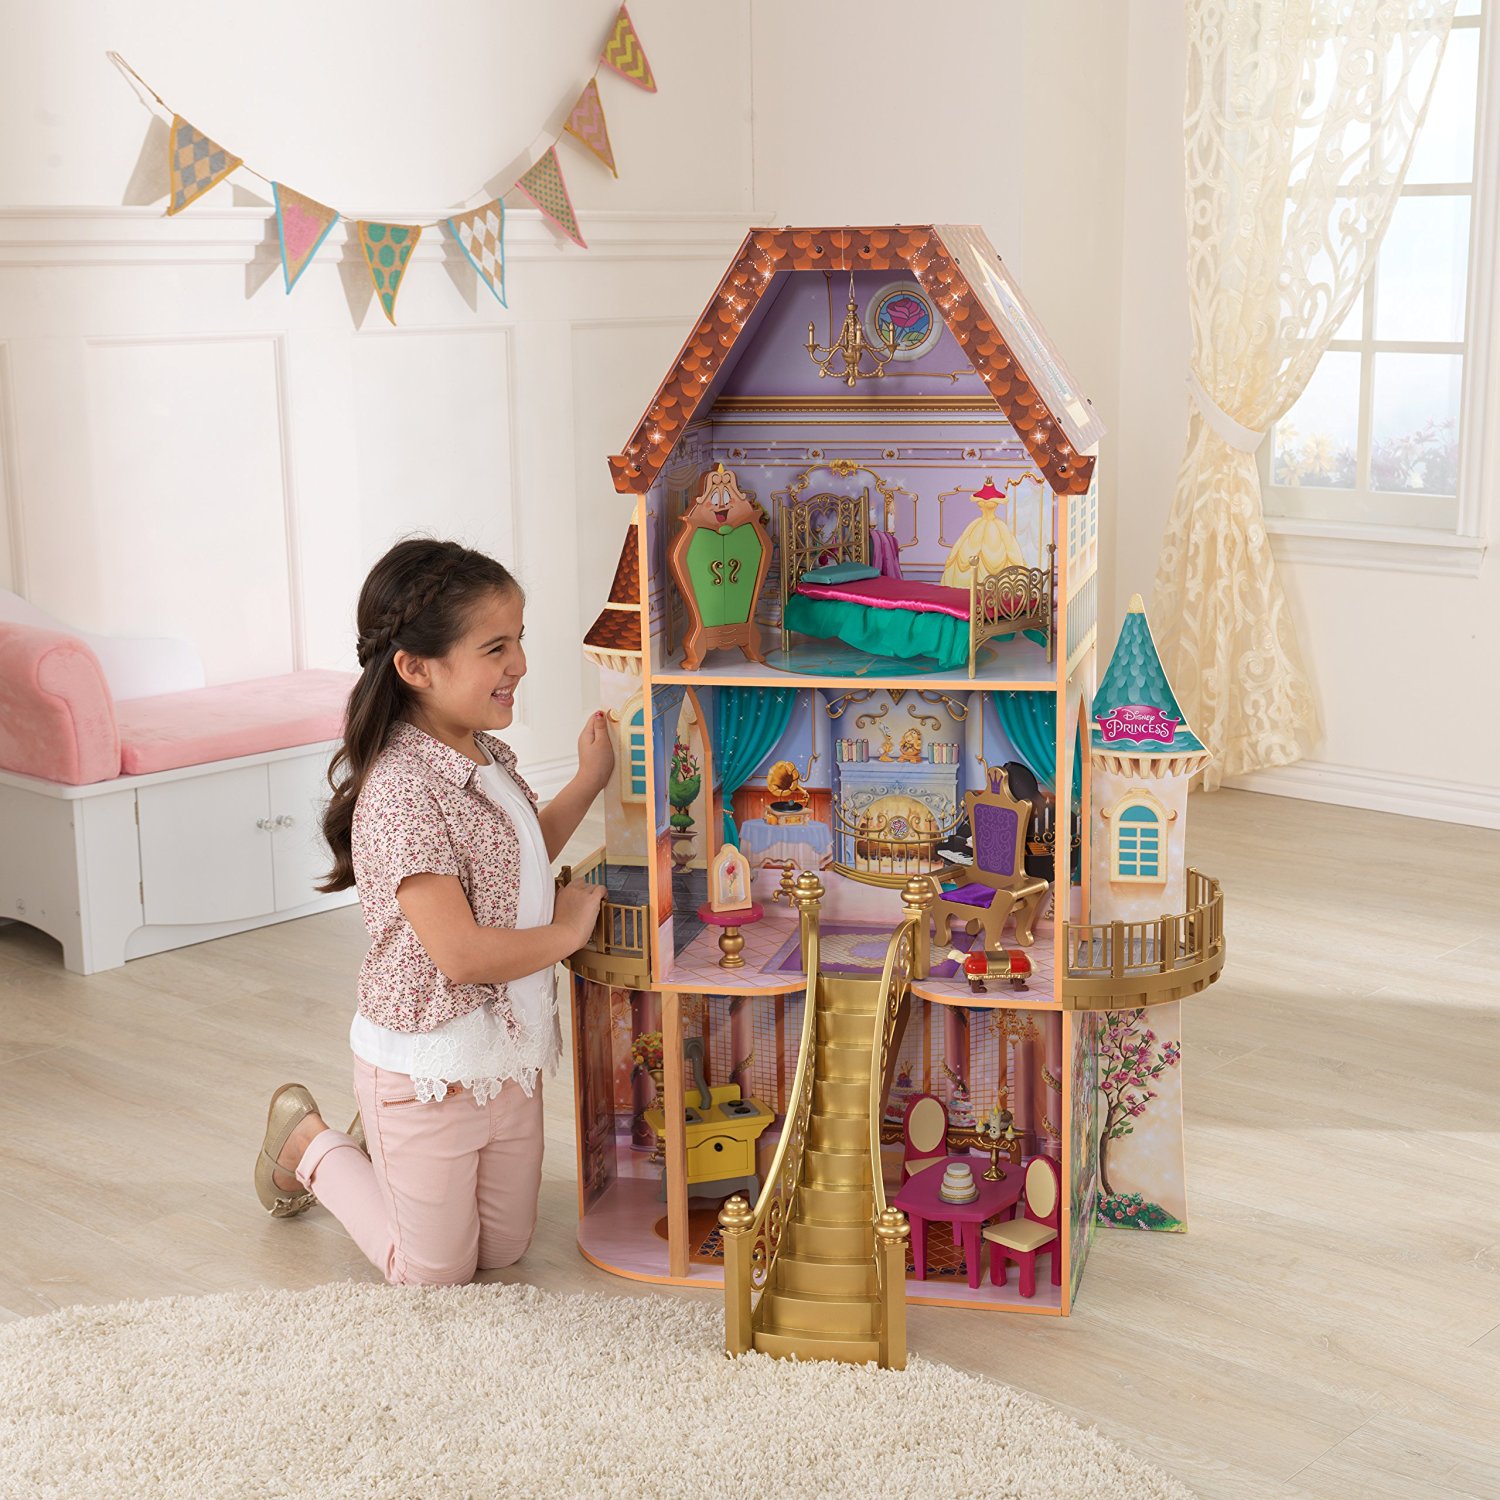 Beauty and the Beast Fan? Check out the KidKraft Belle Enchanted Dollhouse – Just $72.99!